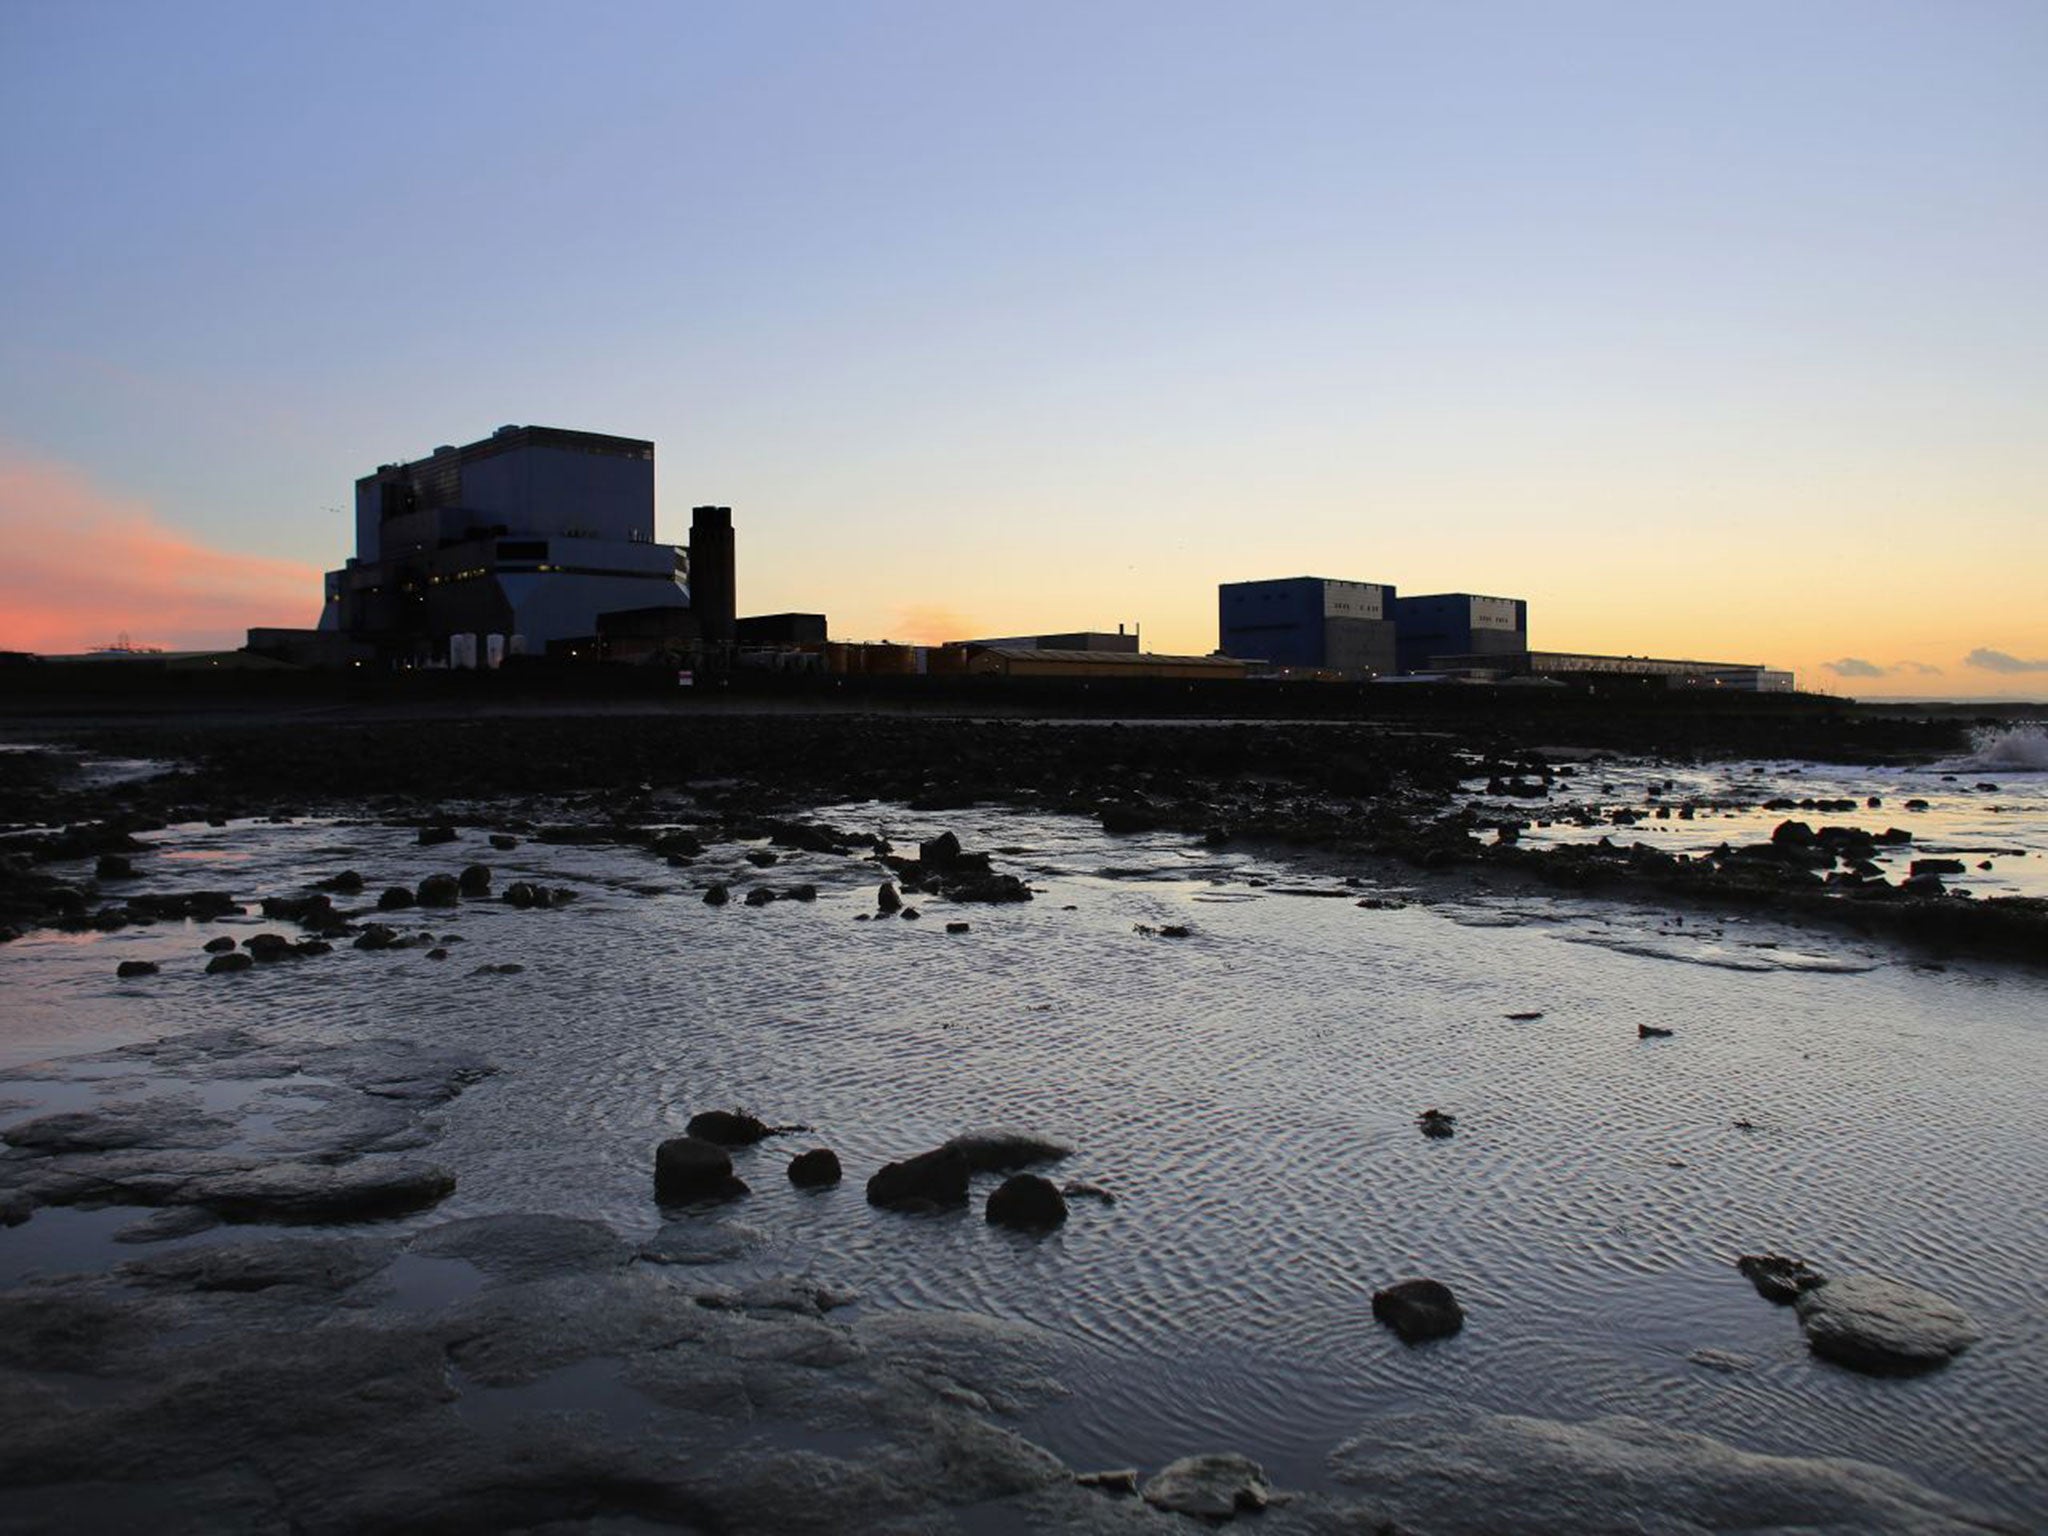 Hinkley Point has been delayed a number of times and was originally supposed to be generating electricity by next year